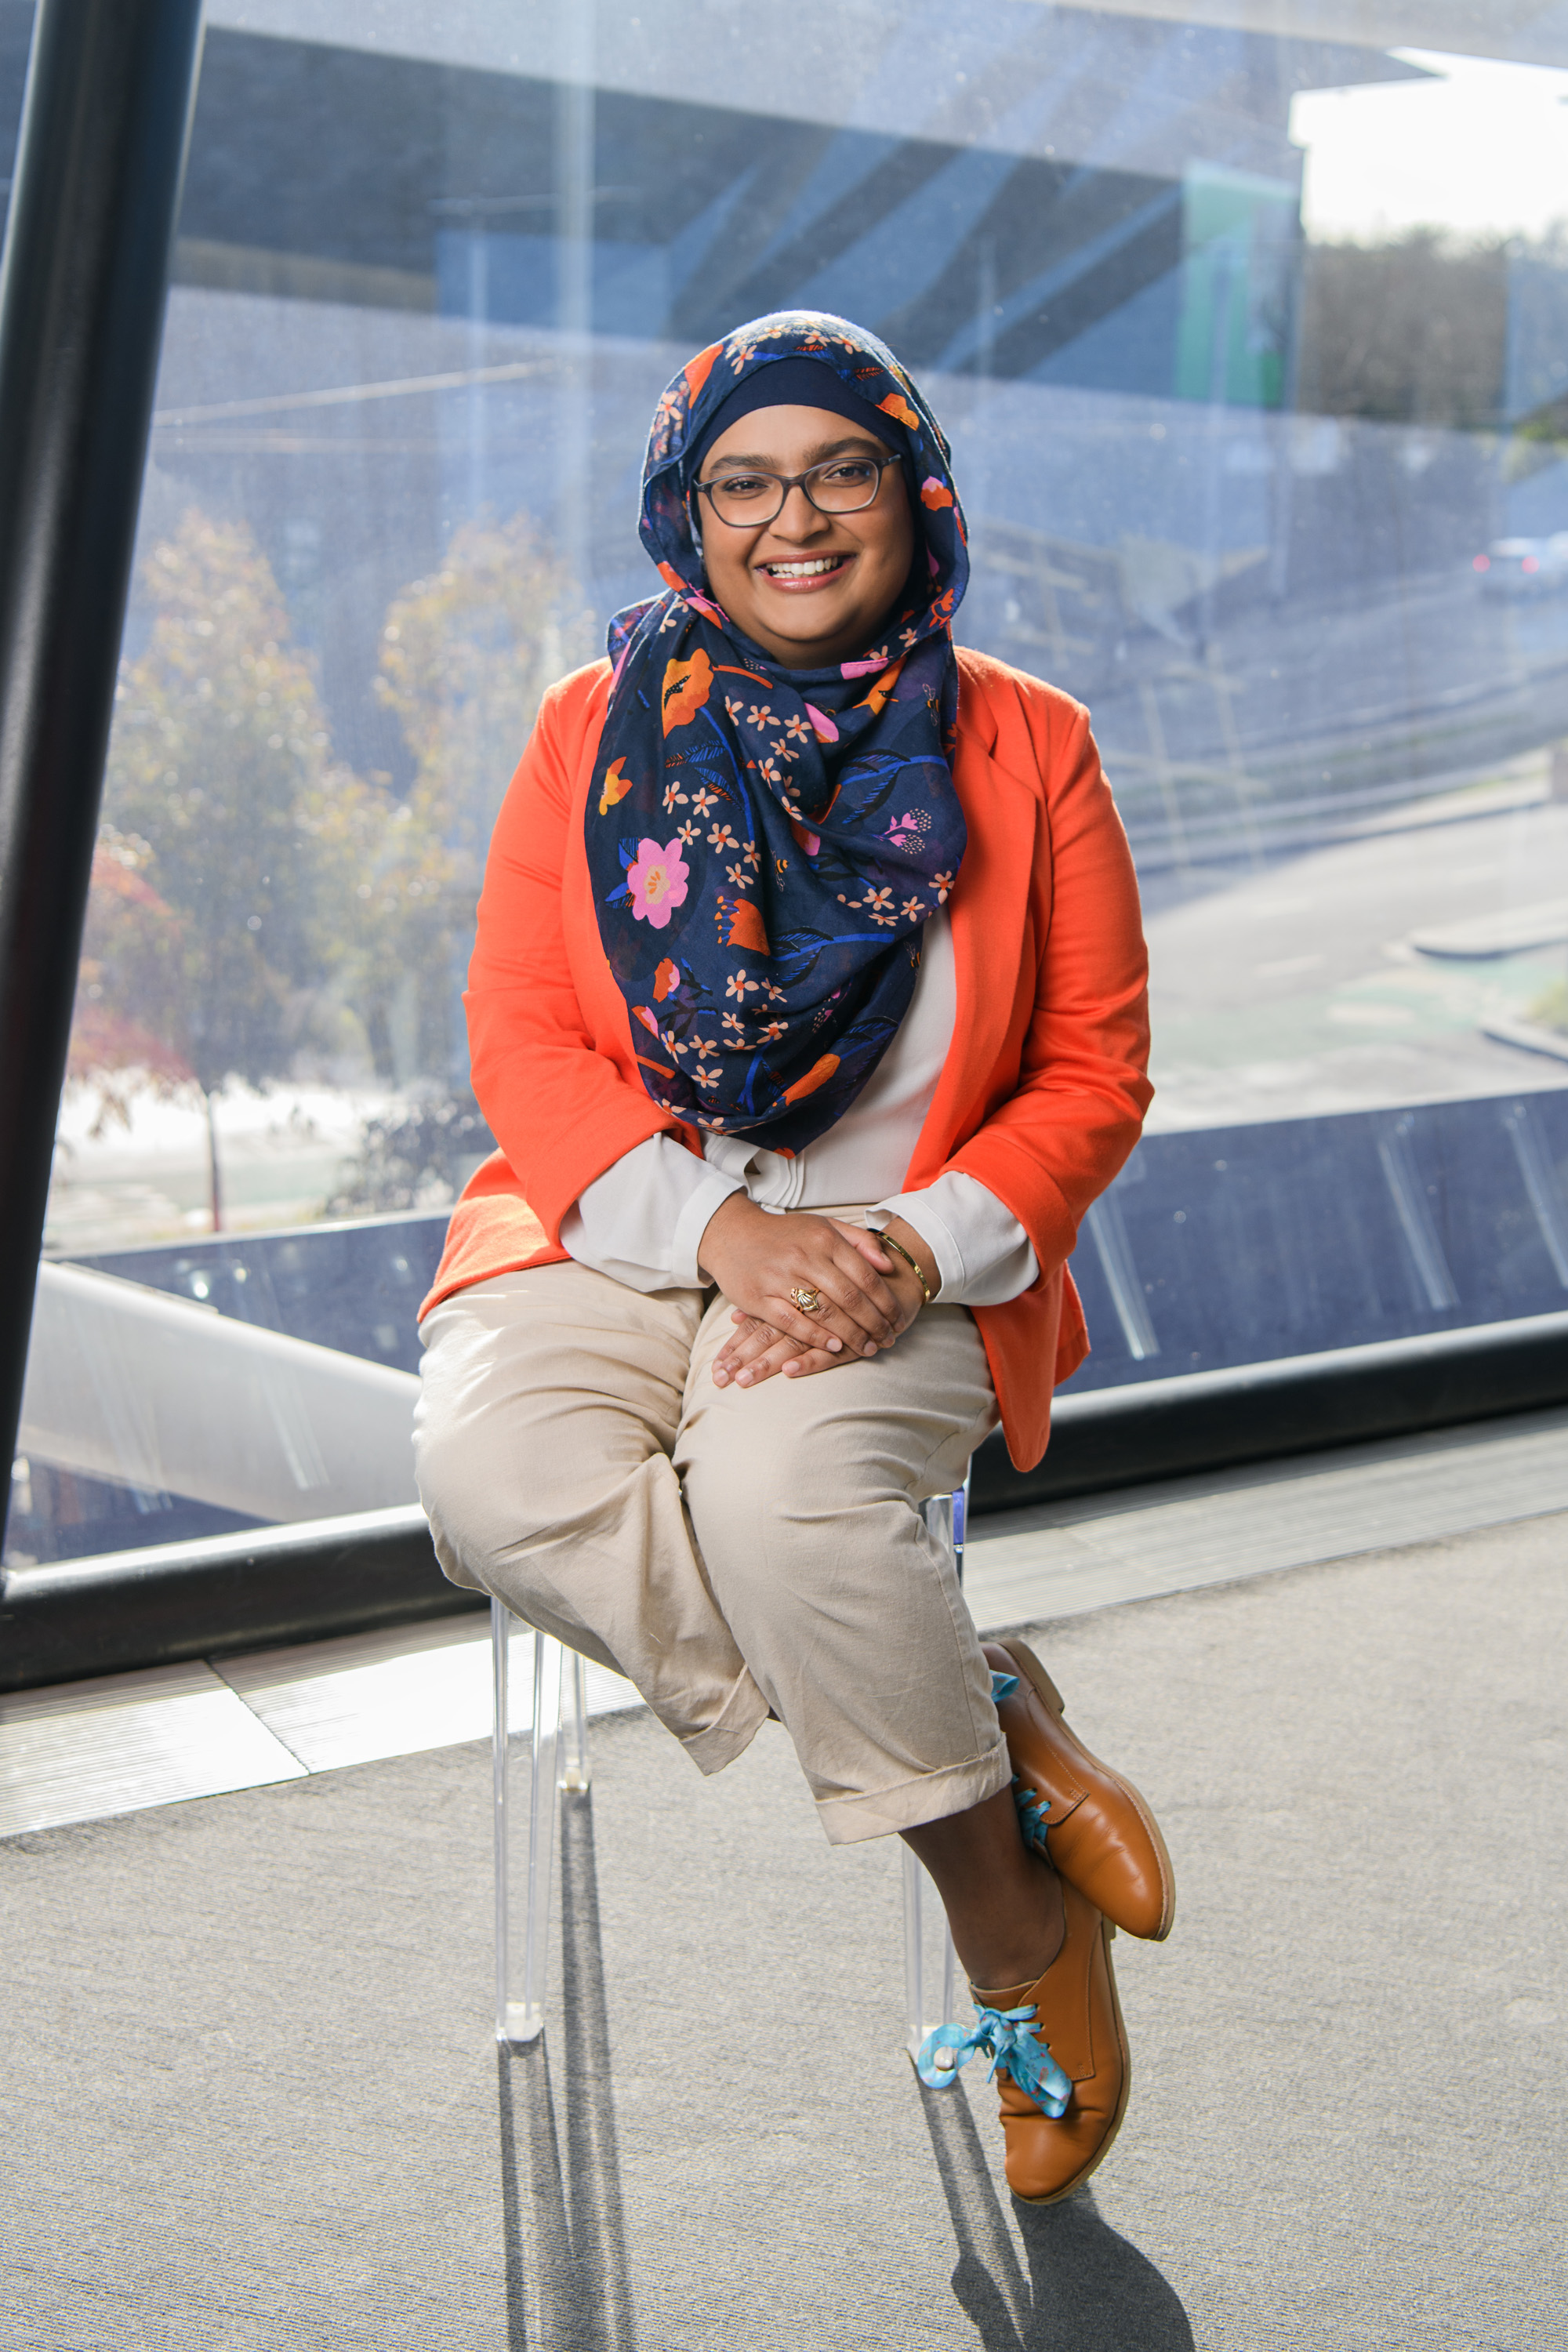 A Muslim Australian woman wearing a headscarf smiles widely into the camera. She is seated in a theatre foyer.